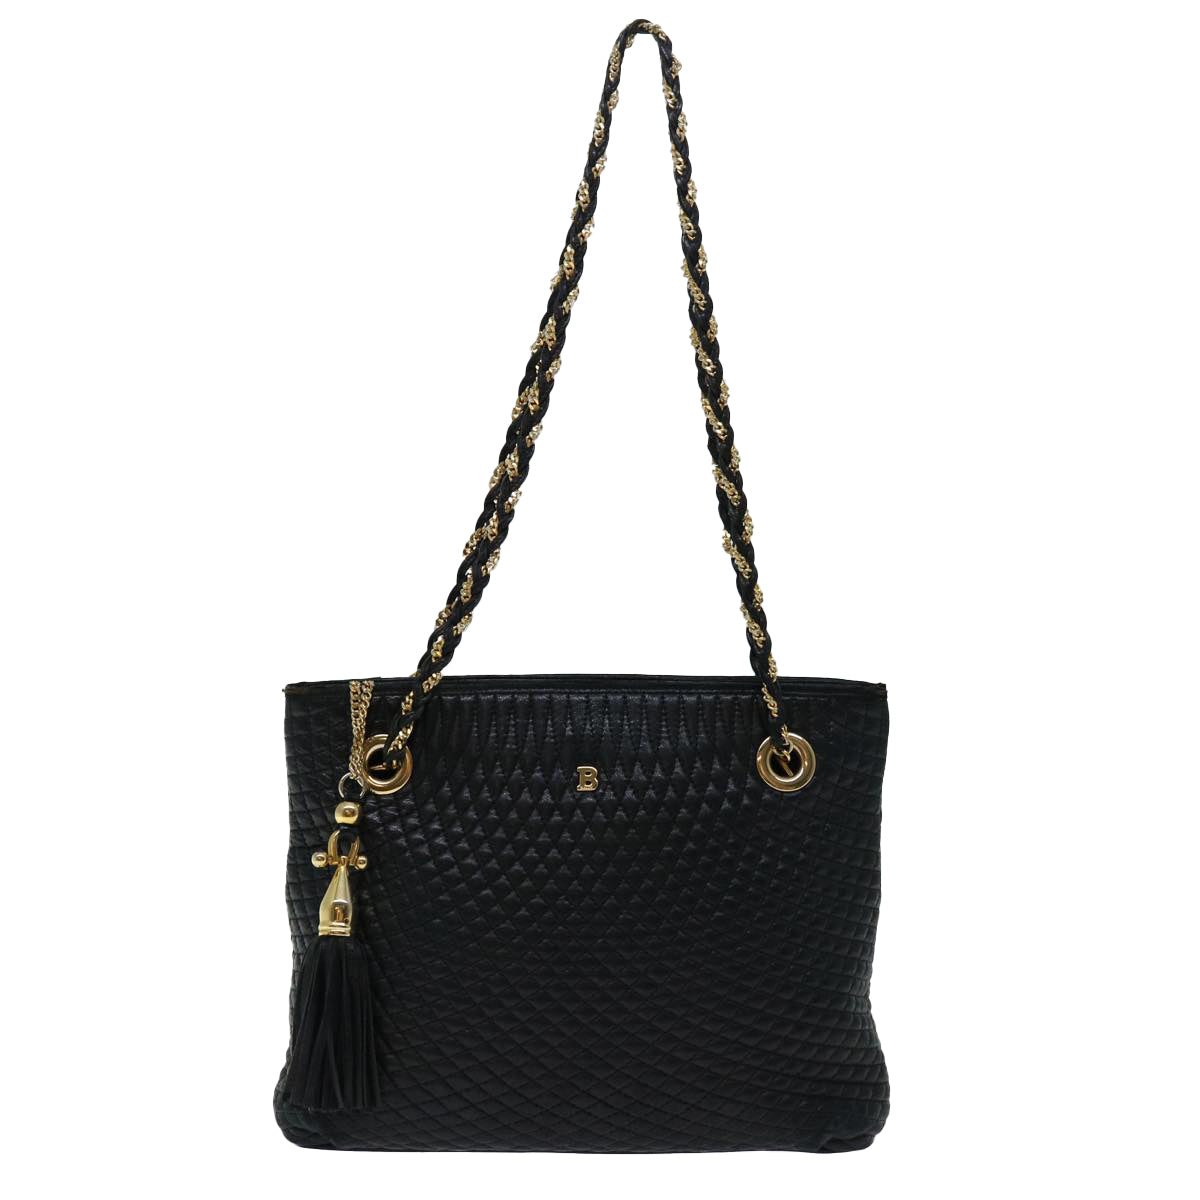 BALLY Quilted Chain Shoulder Bag Leather Black Auth ac2821